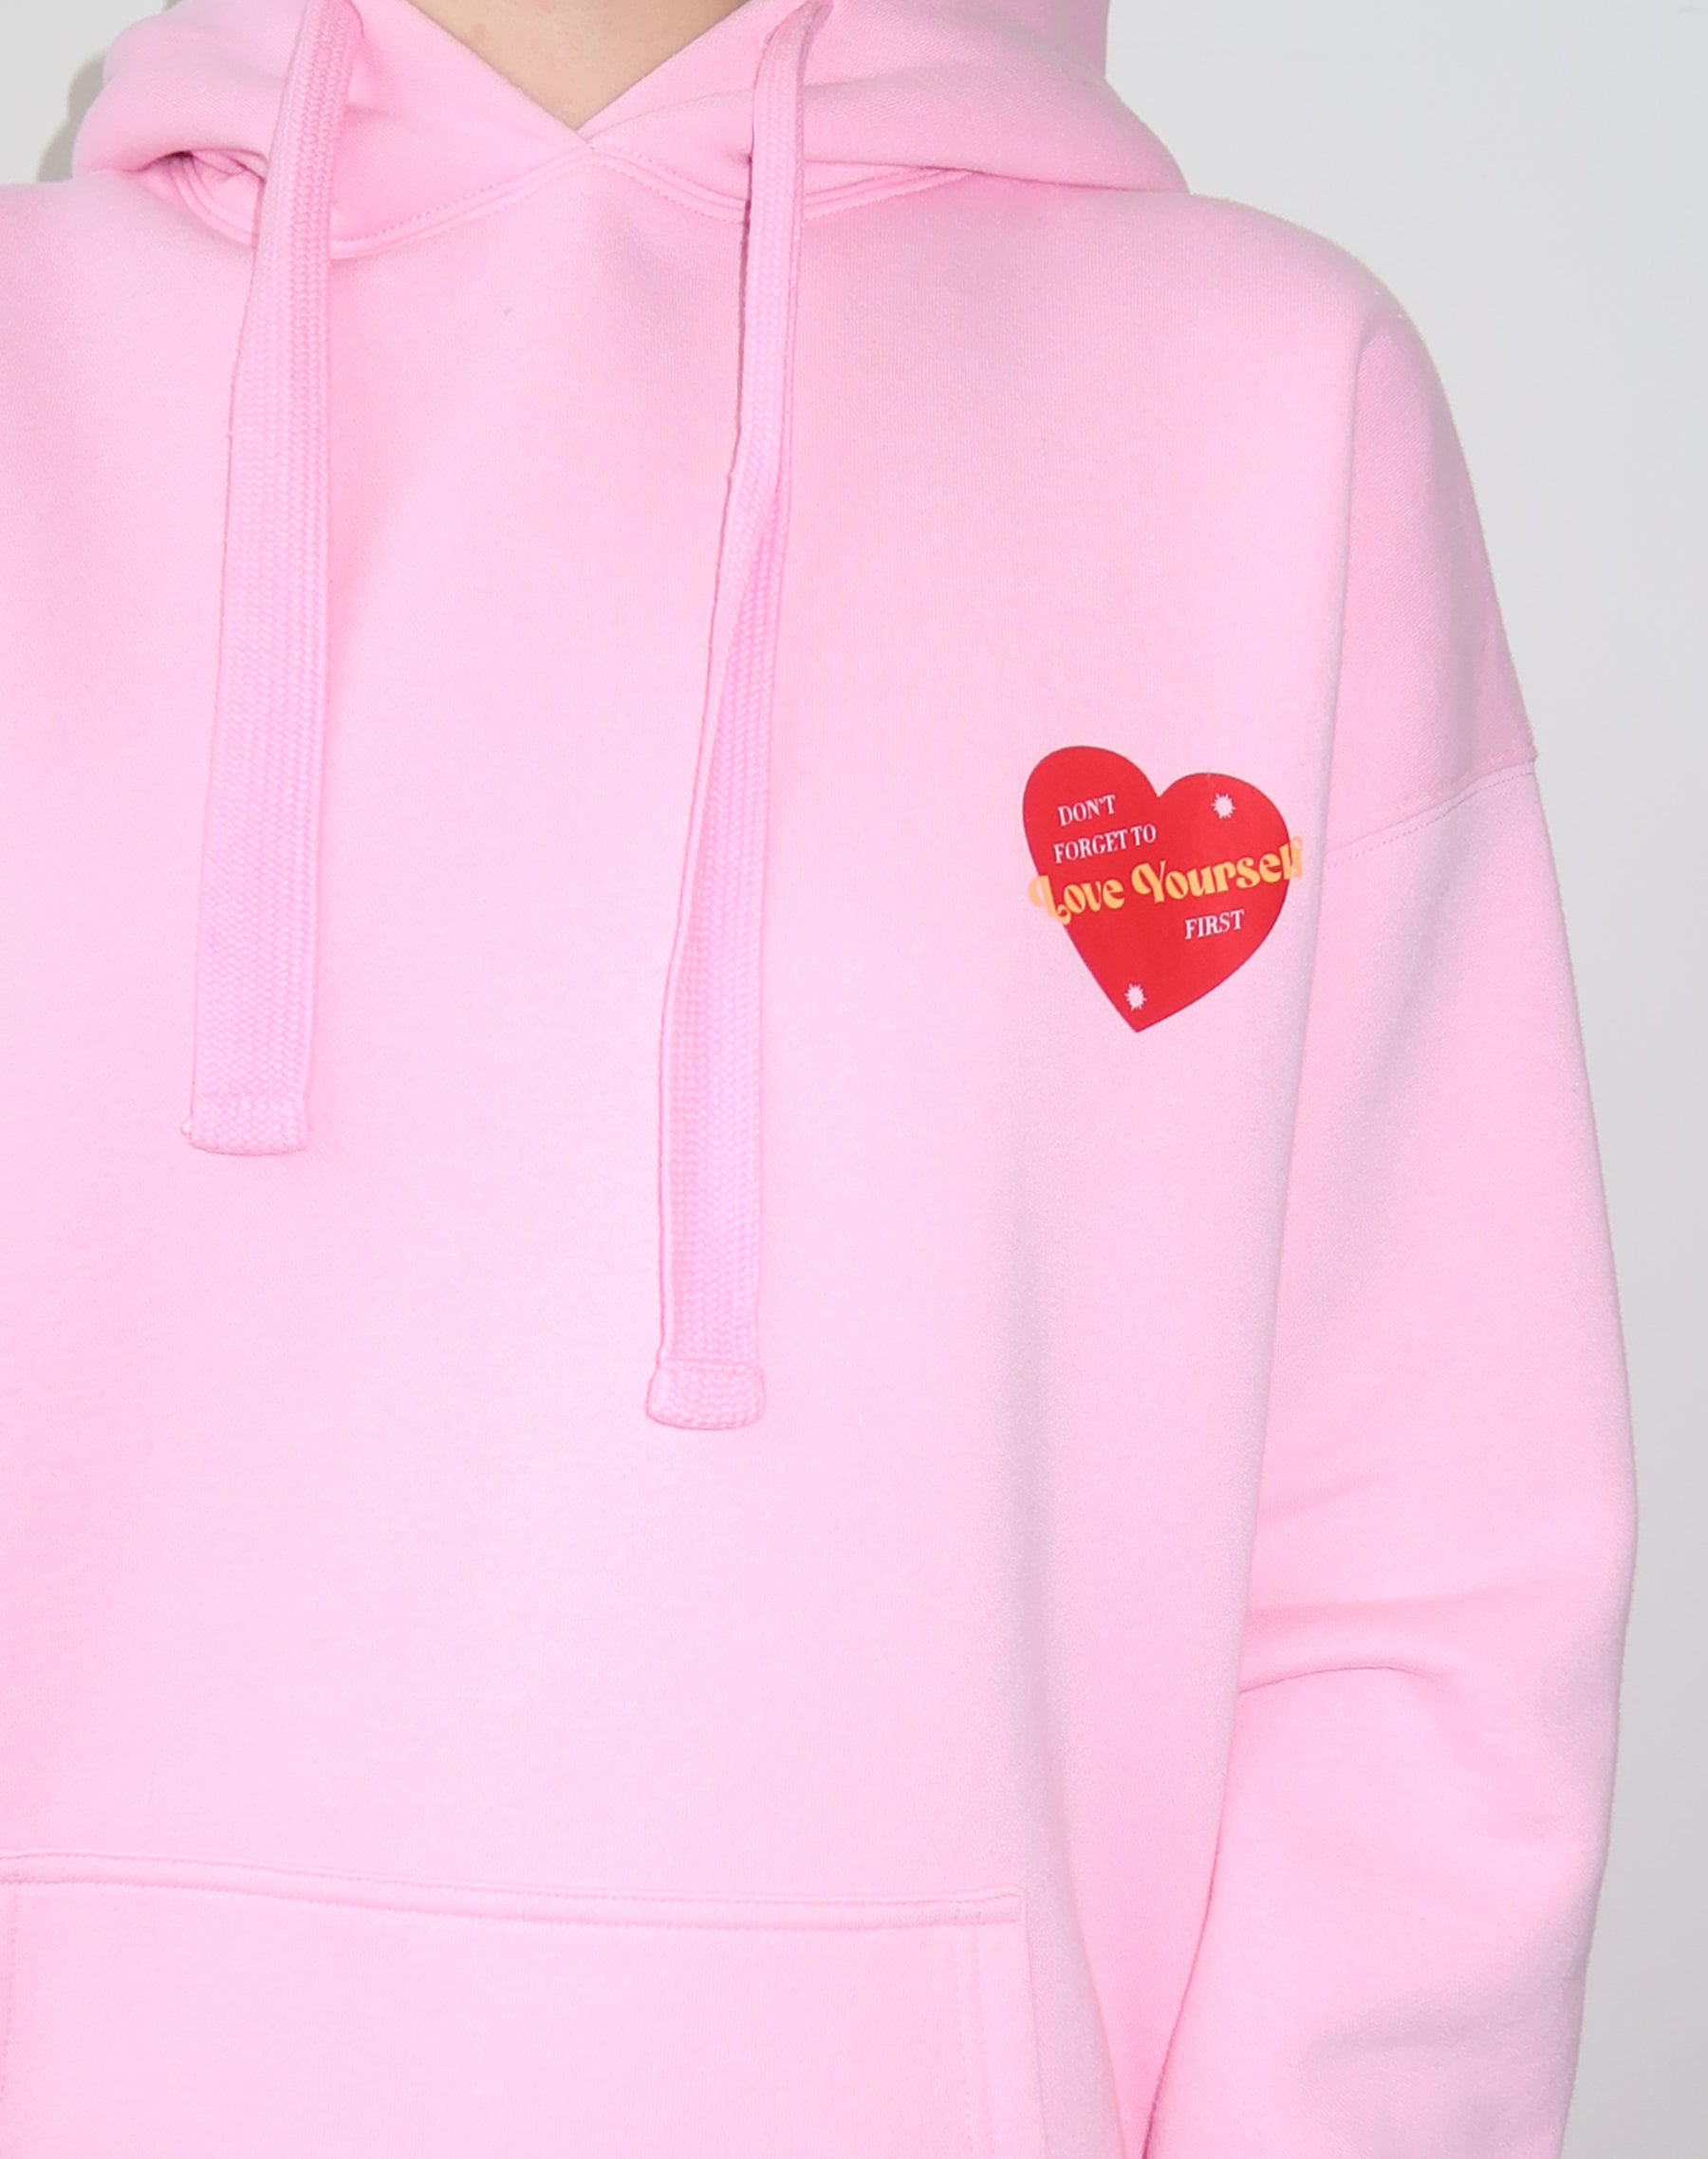 The LOVE YOURSELF Classic Hoodie